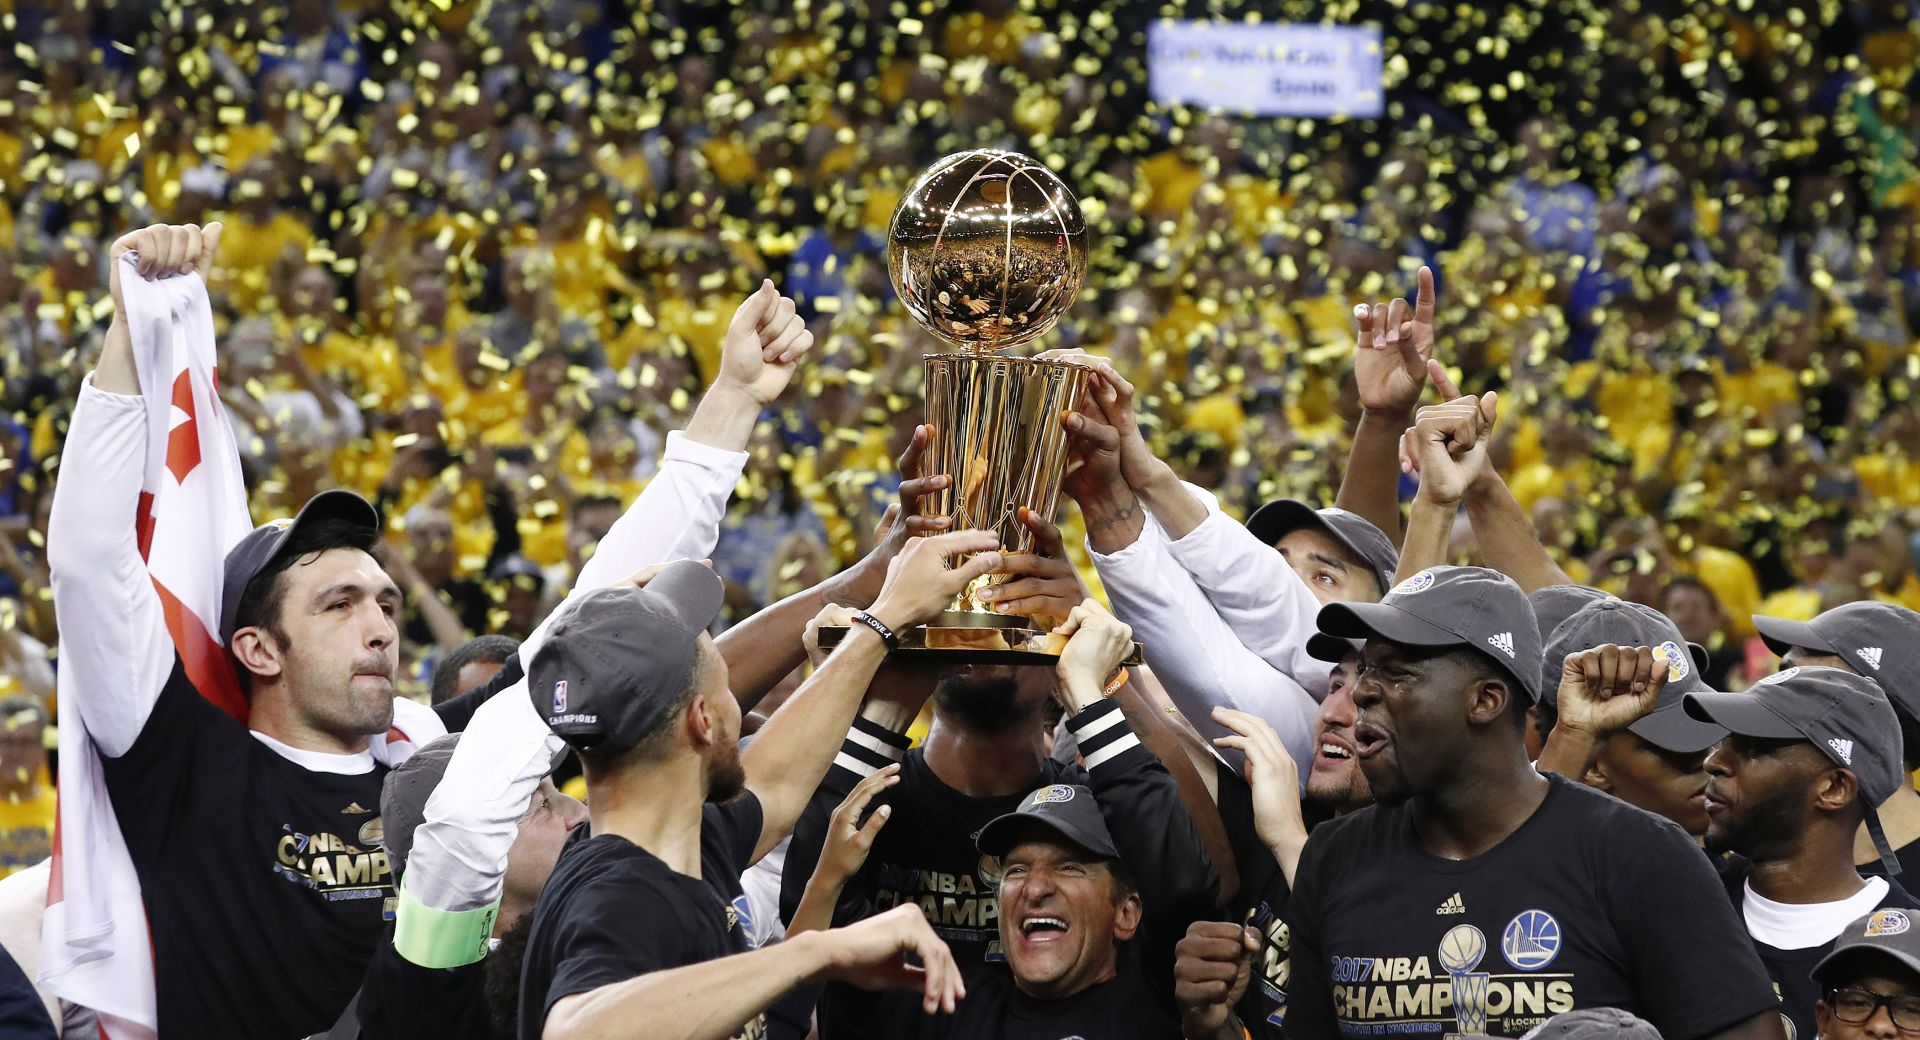 epa06025354 Golden State Warriors team celebrates with the Larry O'Brien NBA Championship Trophy after winning the NBA Finals against the Cleveland Cavaliers in game five of the NBA Finals basketball game at Oracle Arena in Oakland, California, USA, 12 June 2017.  EPA/LARRY W. SMITH